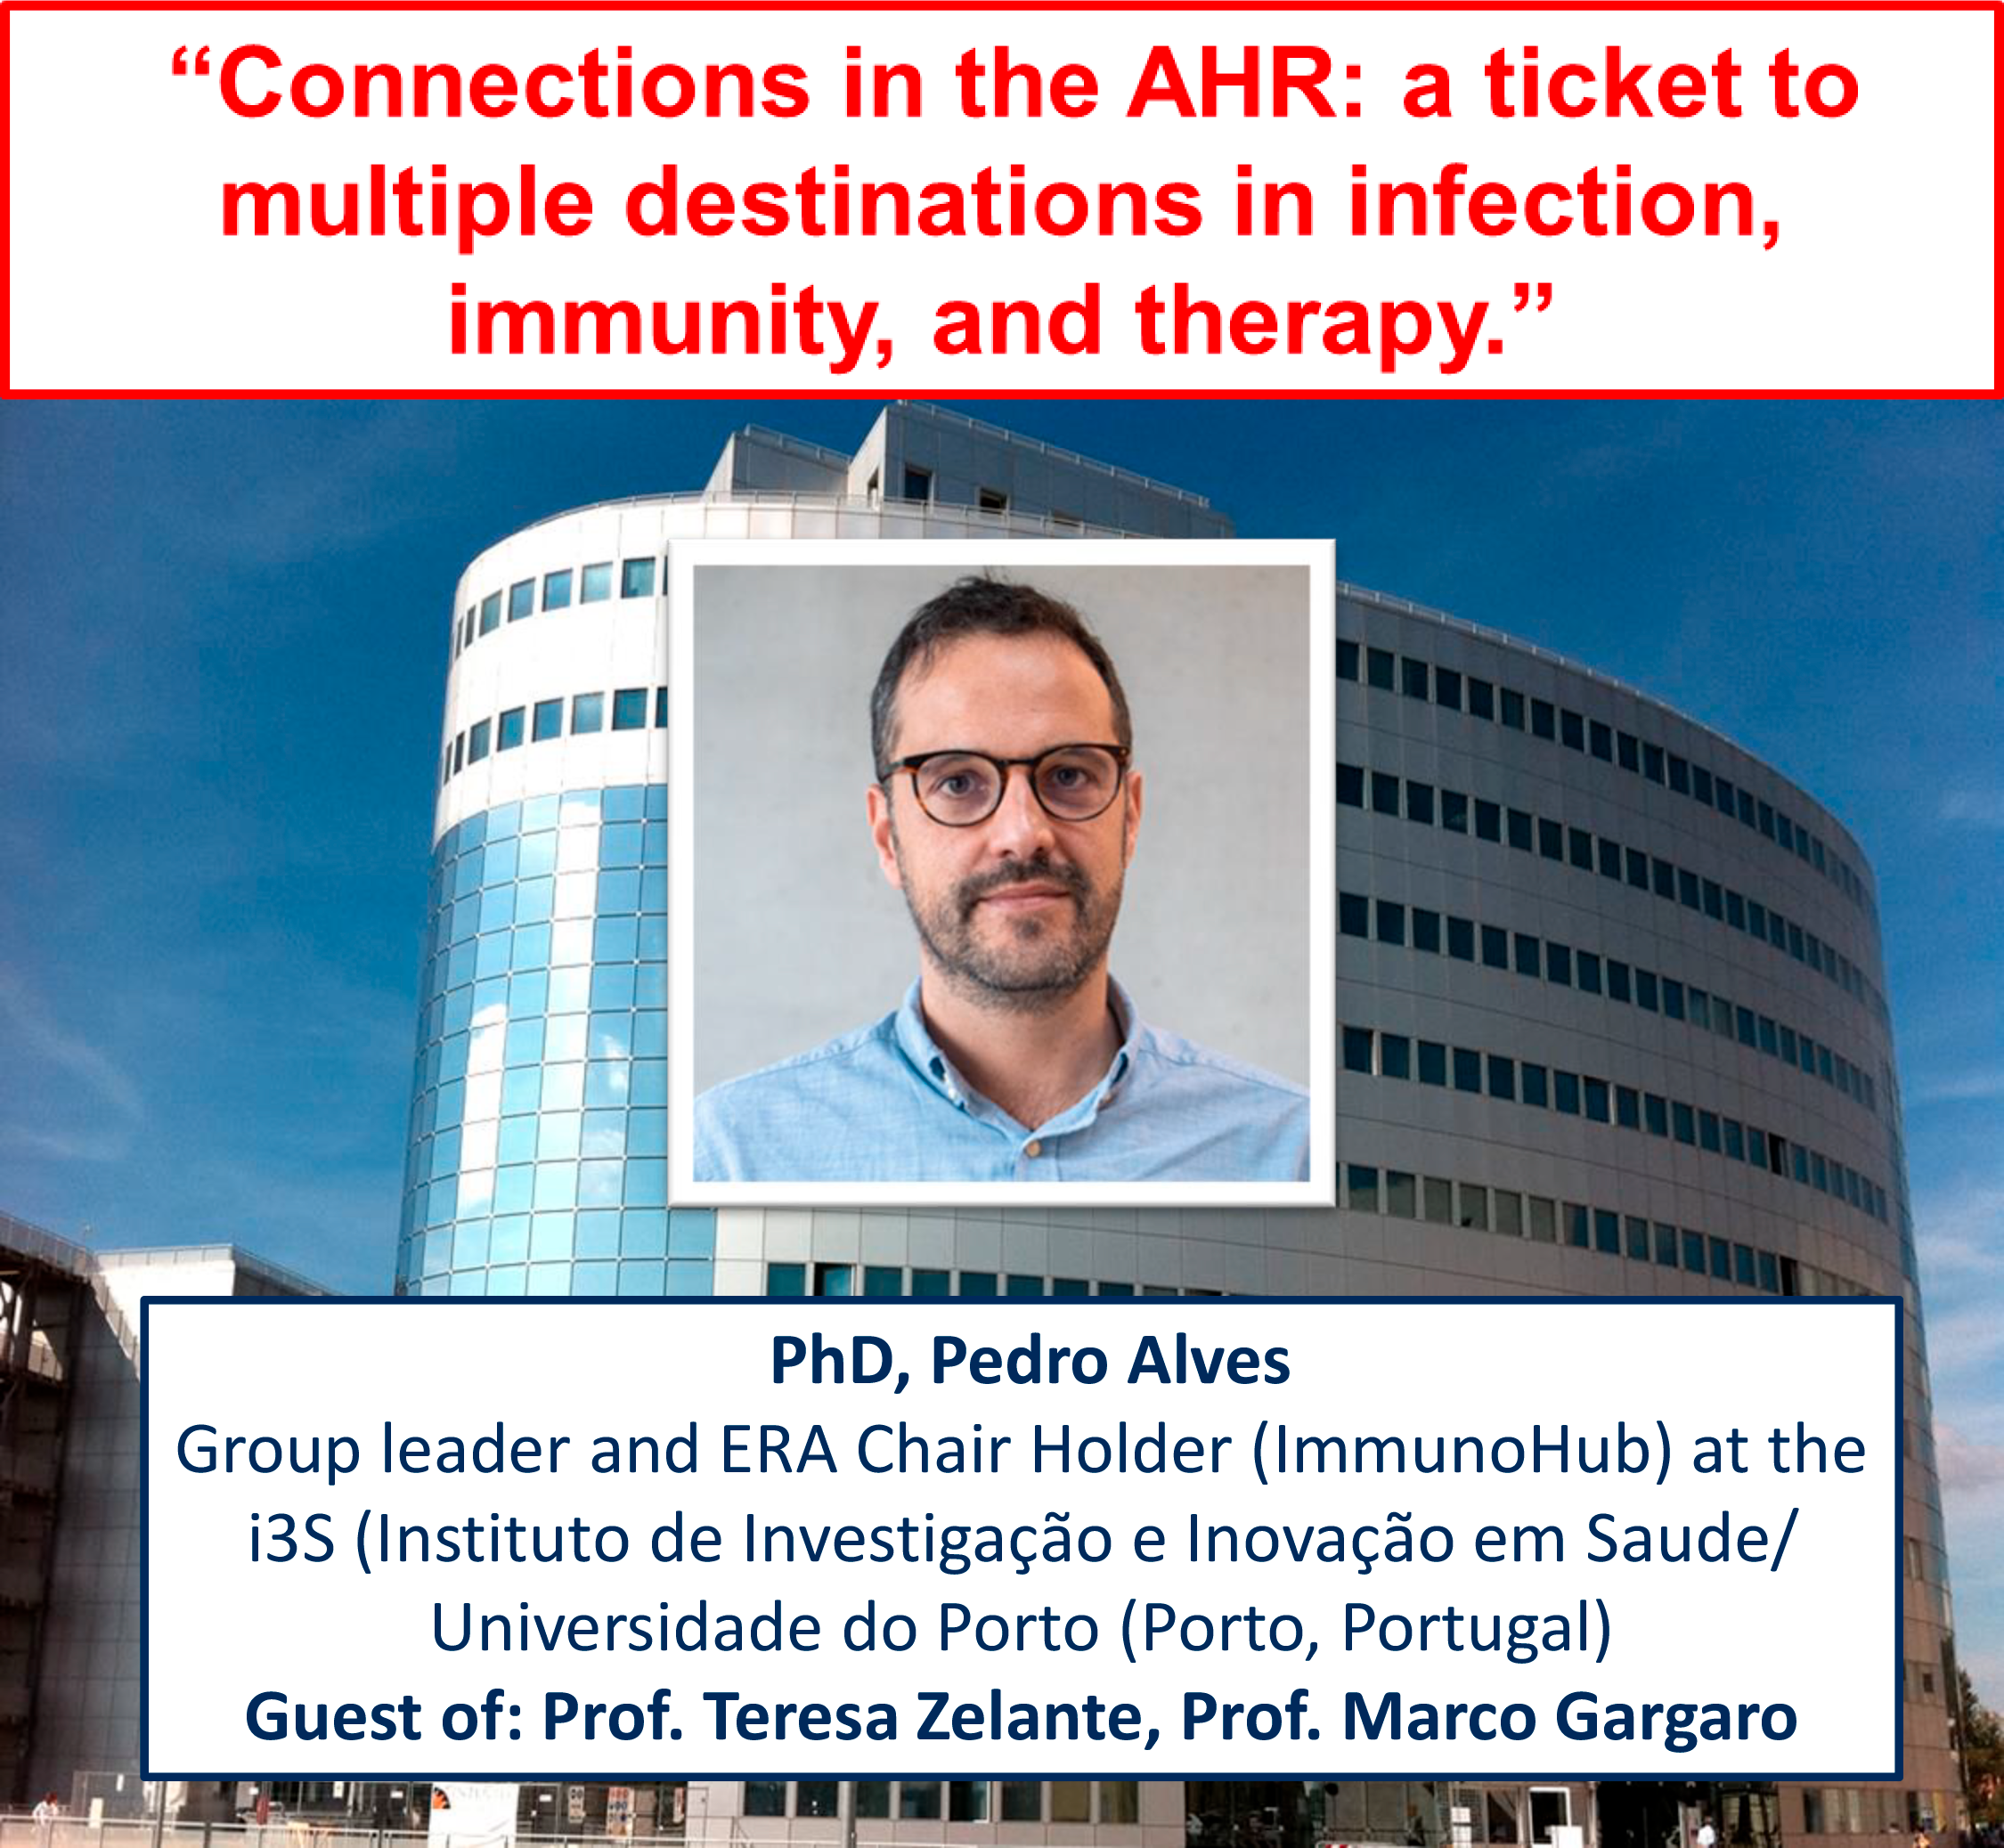 Connections in the AHR: a ticket to multiple destinations in infection, immunity, and therapy